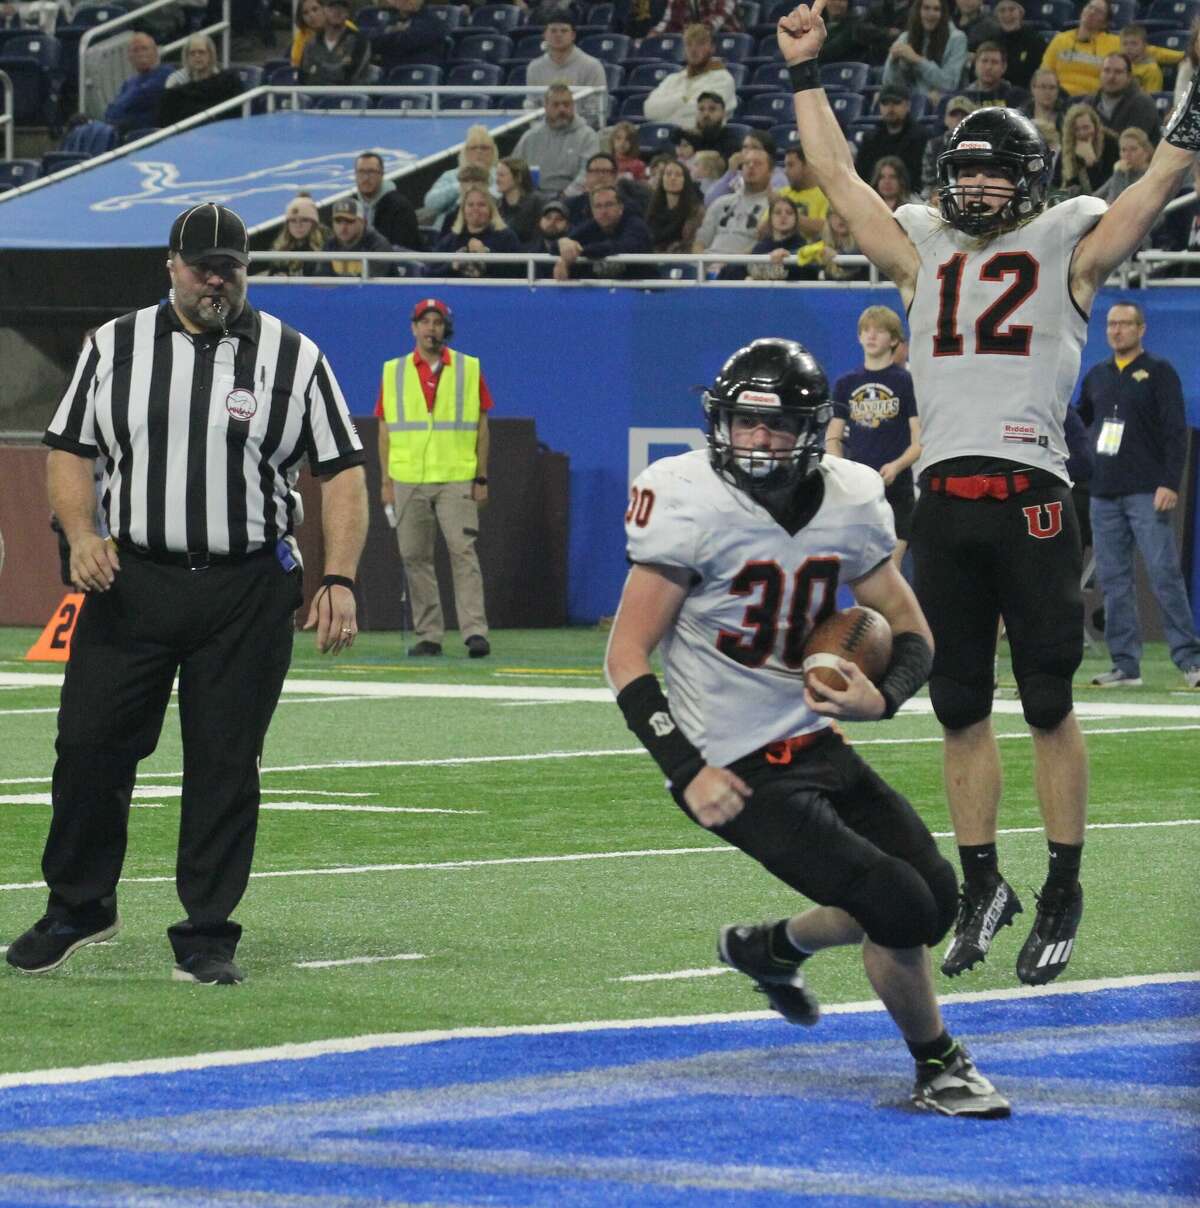 Ubly's Seth Maurer scored two touchdowns on the day.